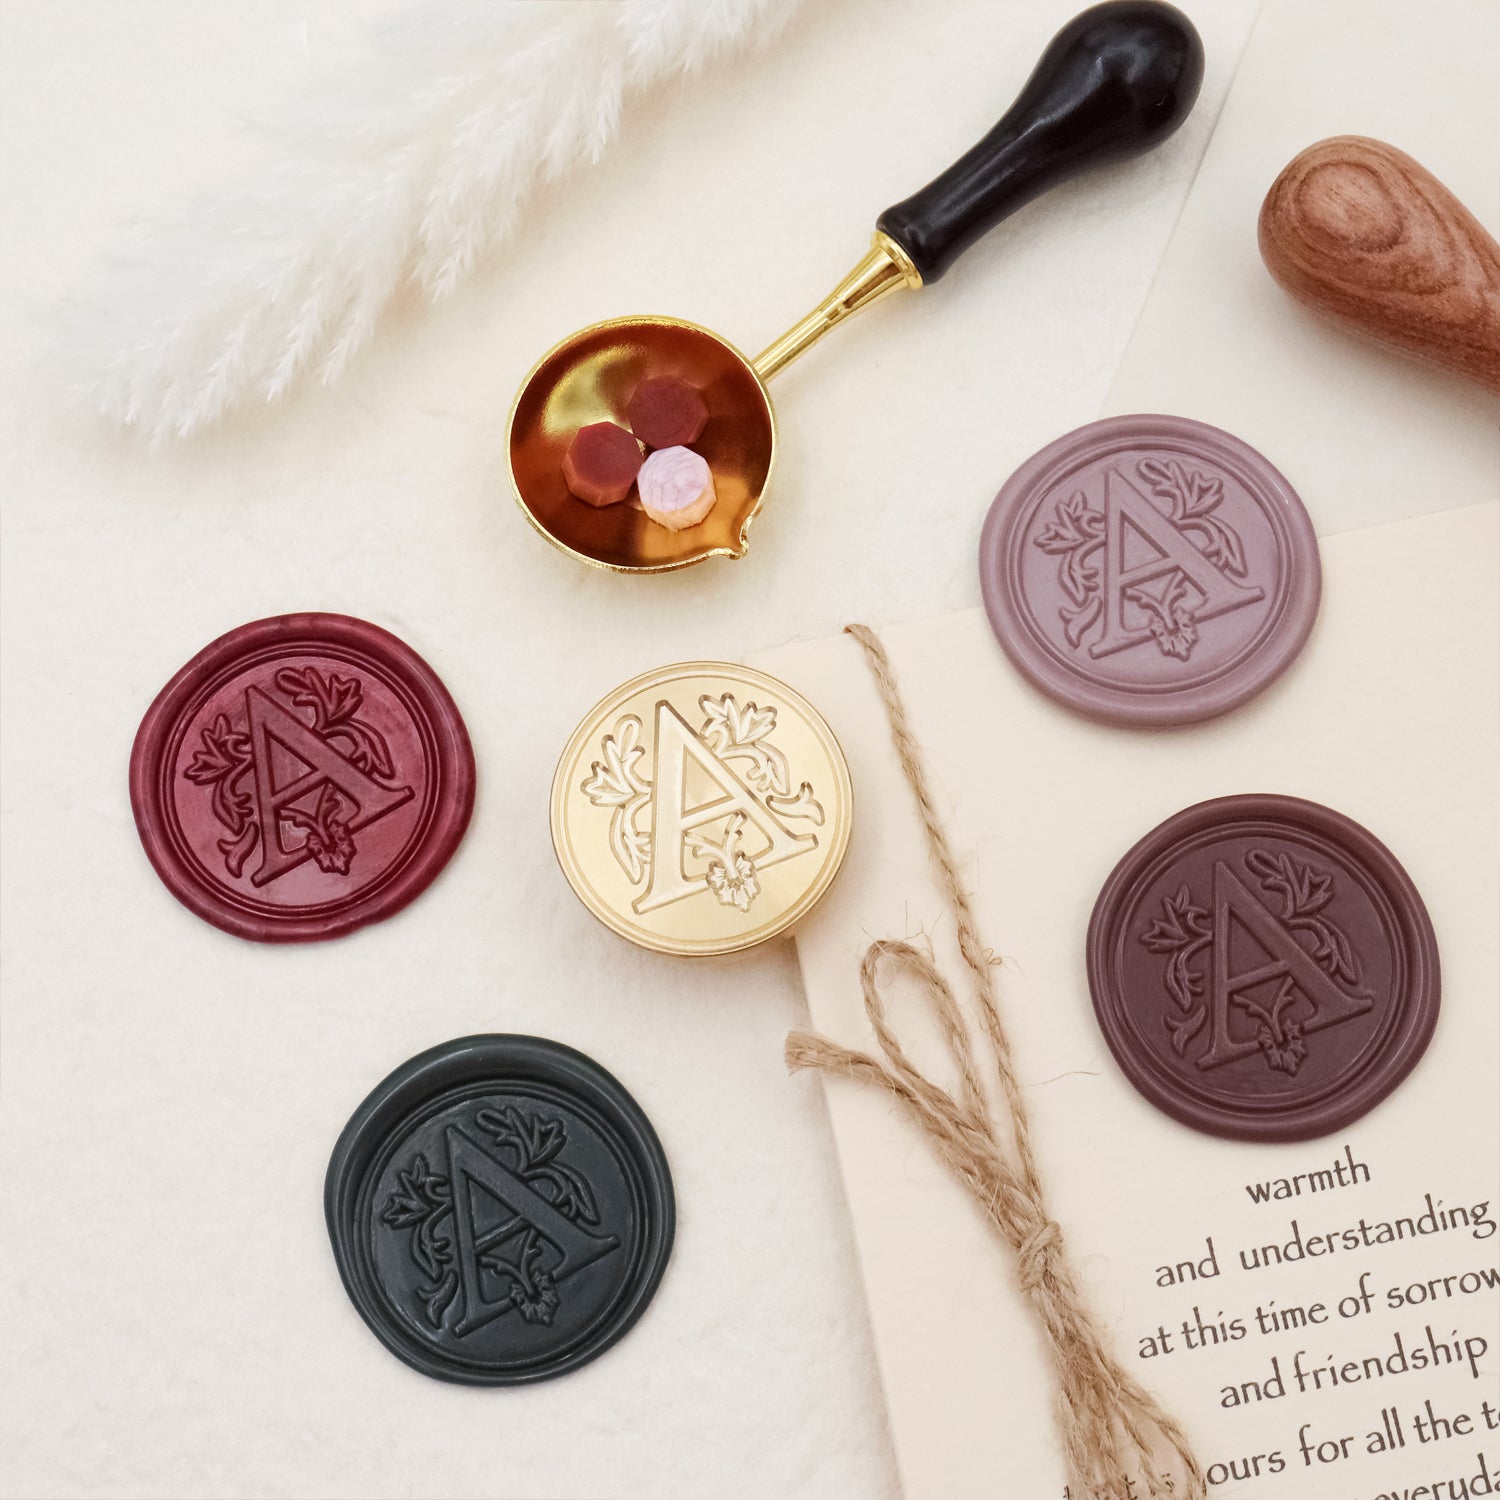 Ready Made Wax Seal Stamp - 3D Relief Halloween and Gothic Wax Seal Stamp (9 Design)